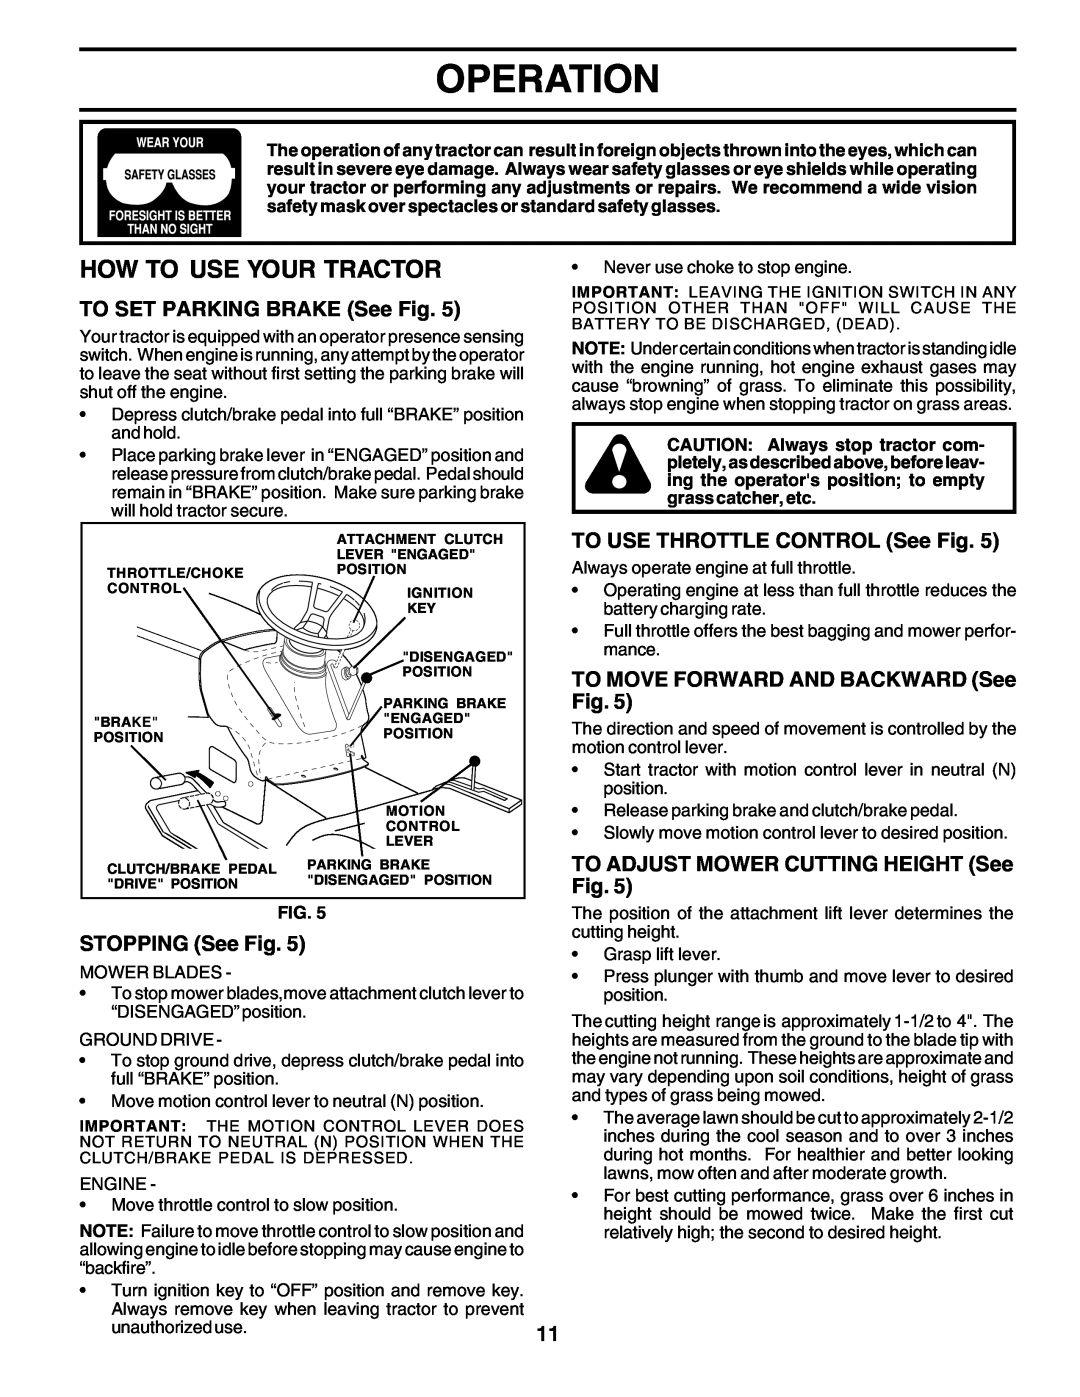 Weed Eater 178704 manual How To Use Your Tractor, Operation, TO SET PARKING BRAKE See Fig, STOPPING See Fig 